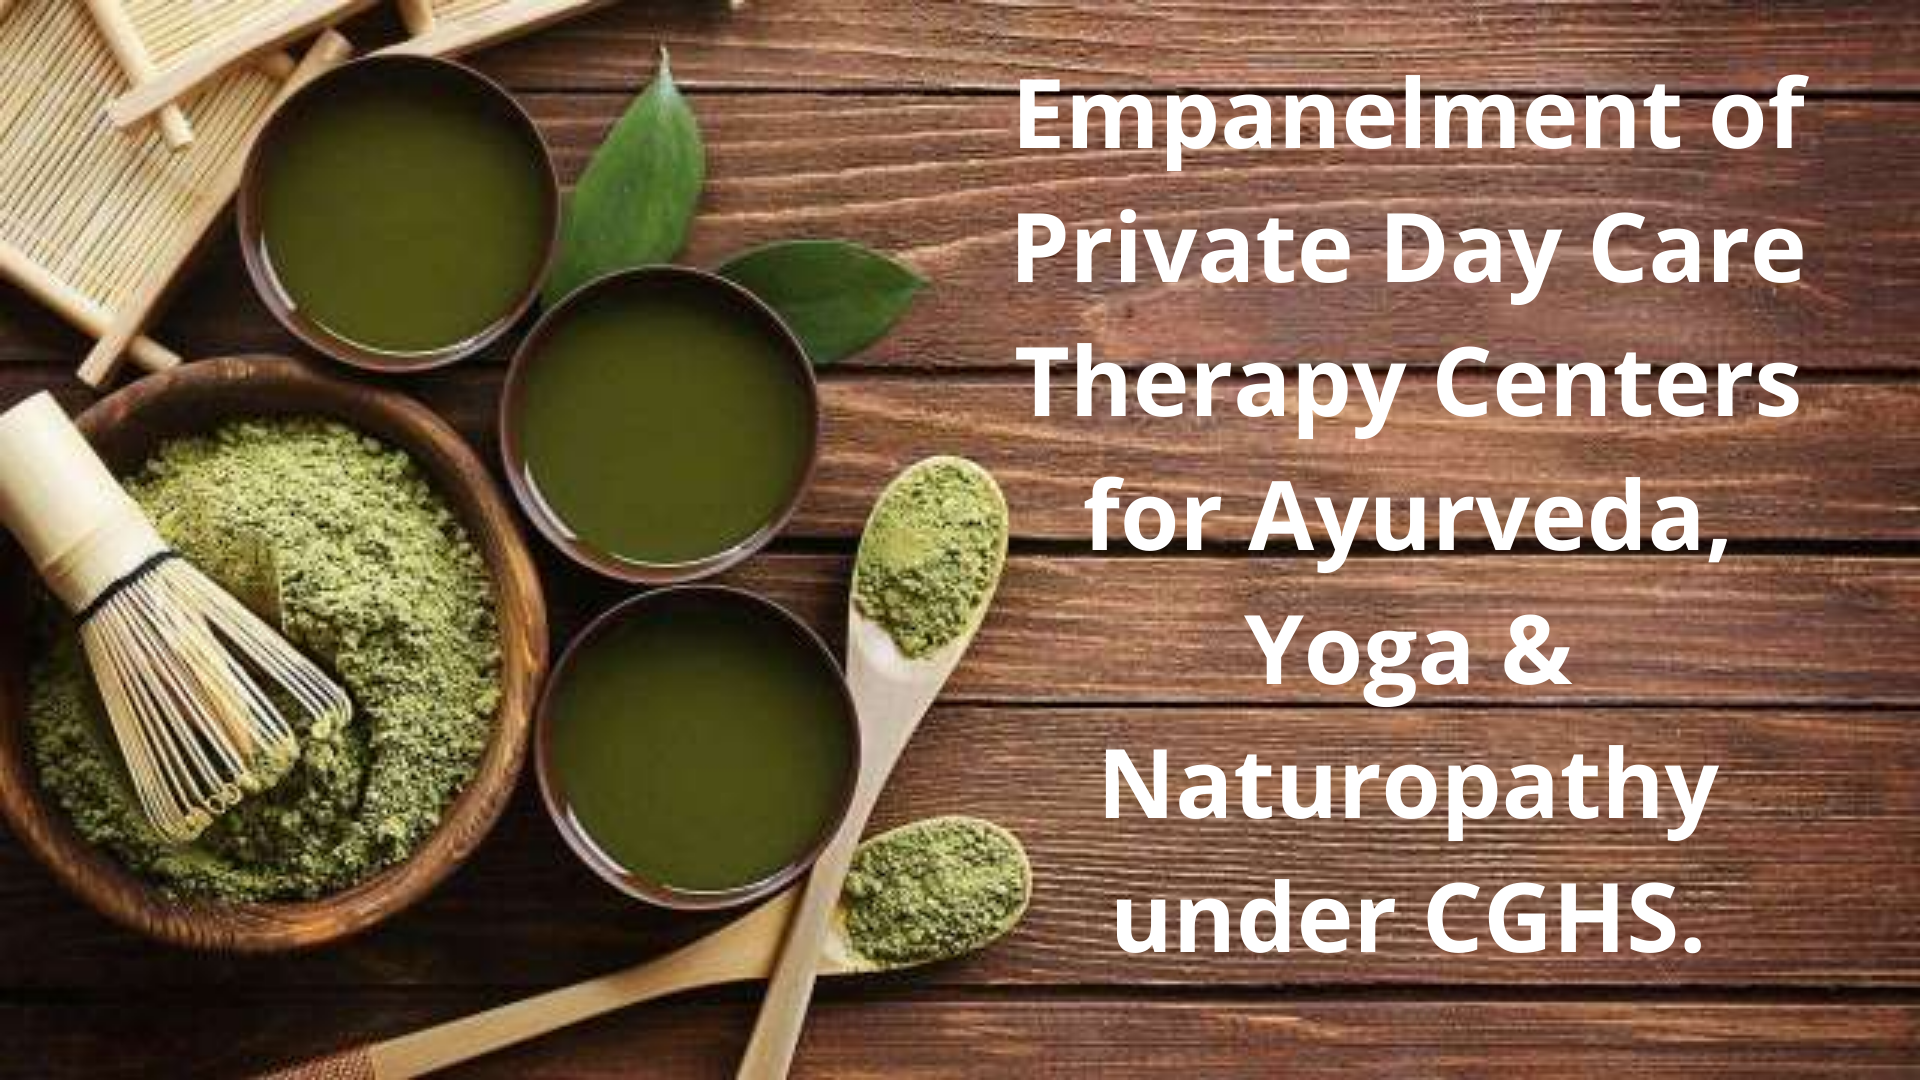 Empanelment of Private Day Care Therapy Centers for Ayurveda, Yoga & Naturopathy under CGHS Delhi / NCR